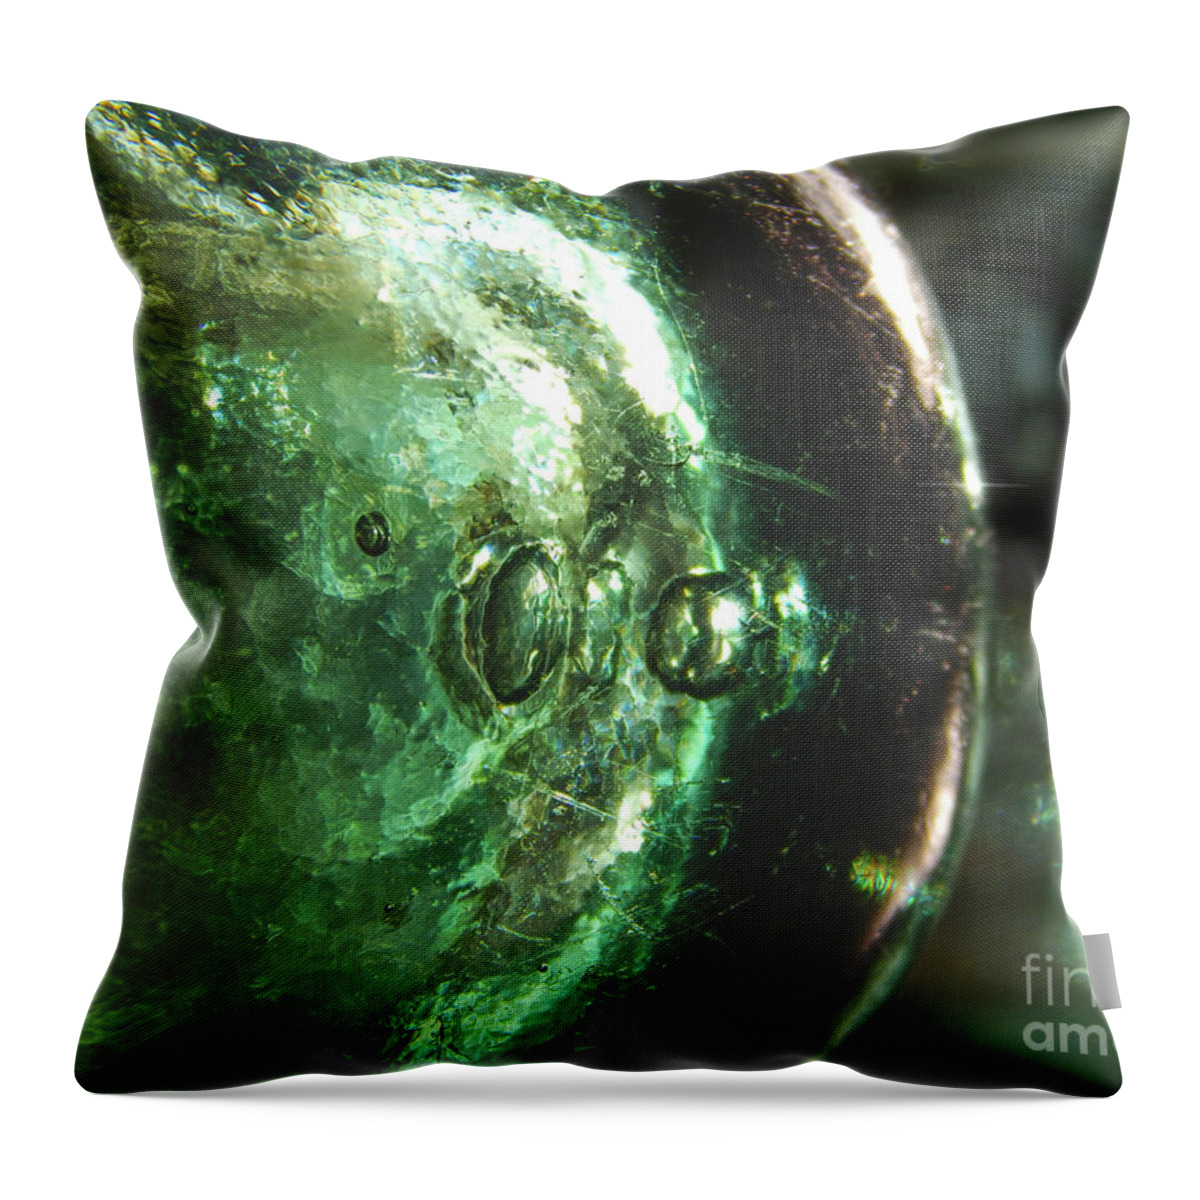 Bottle Throw Pillow featuring the photograph Antique Round Bottom Bottle by Phil Perkins